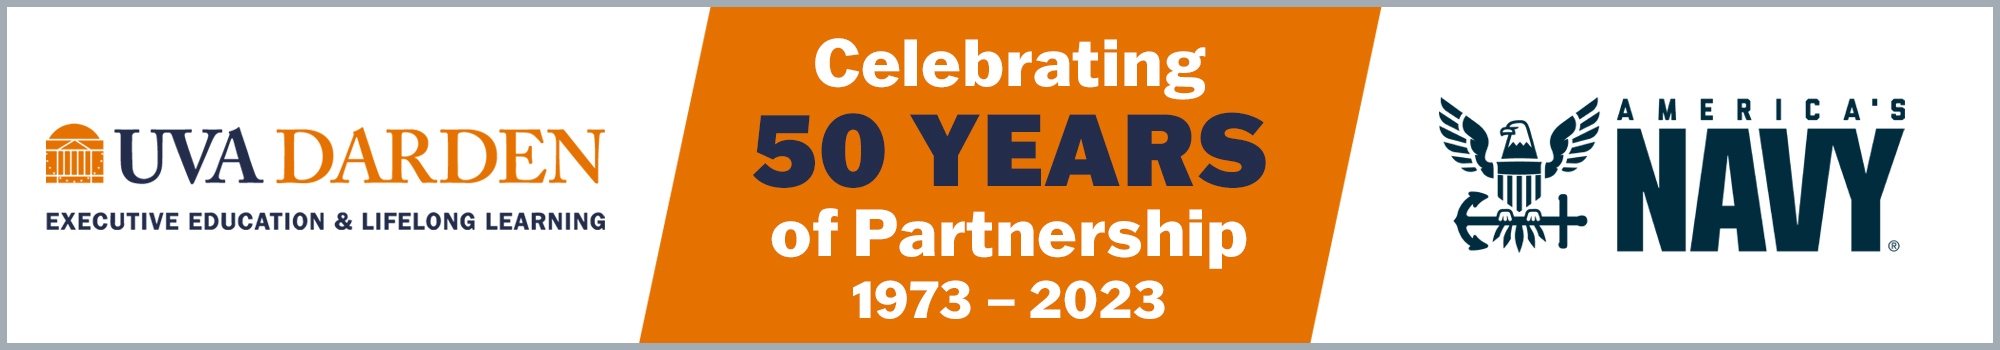 Darden and US Navy 50 Years Partnership